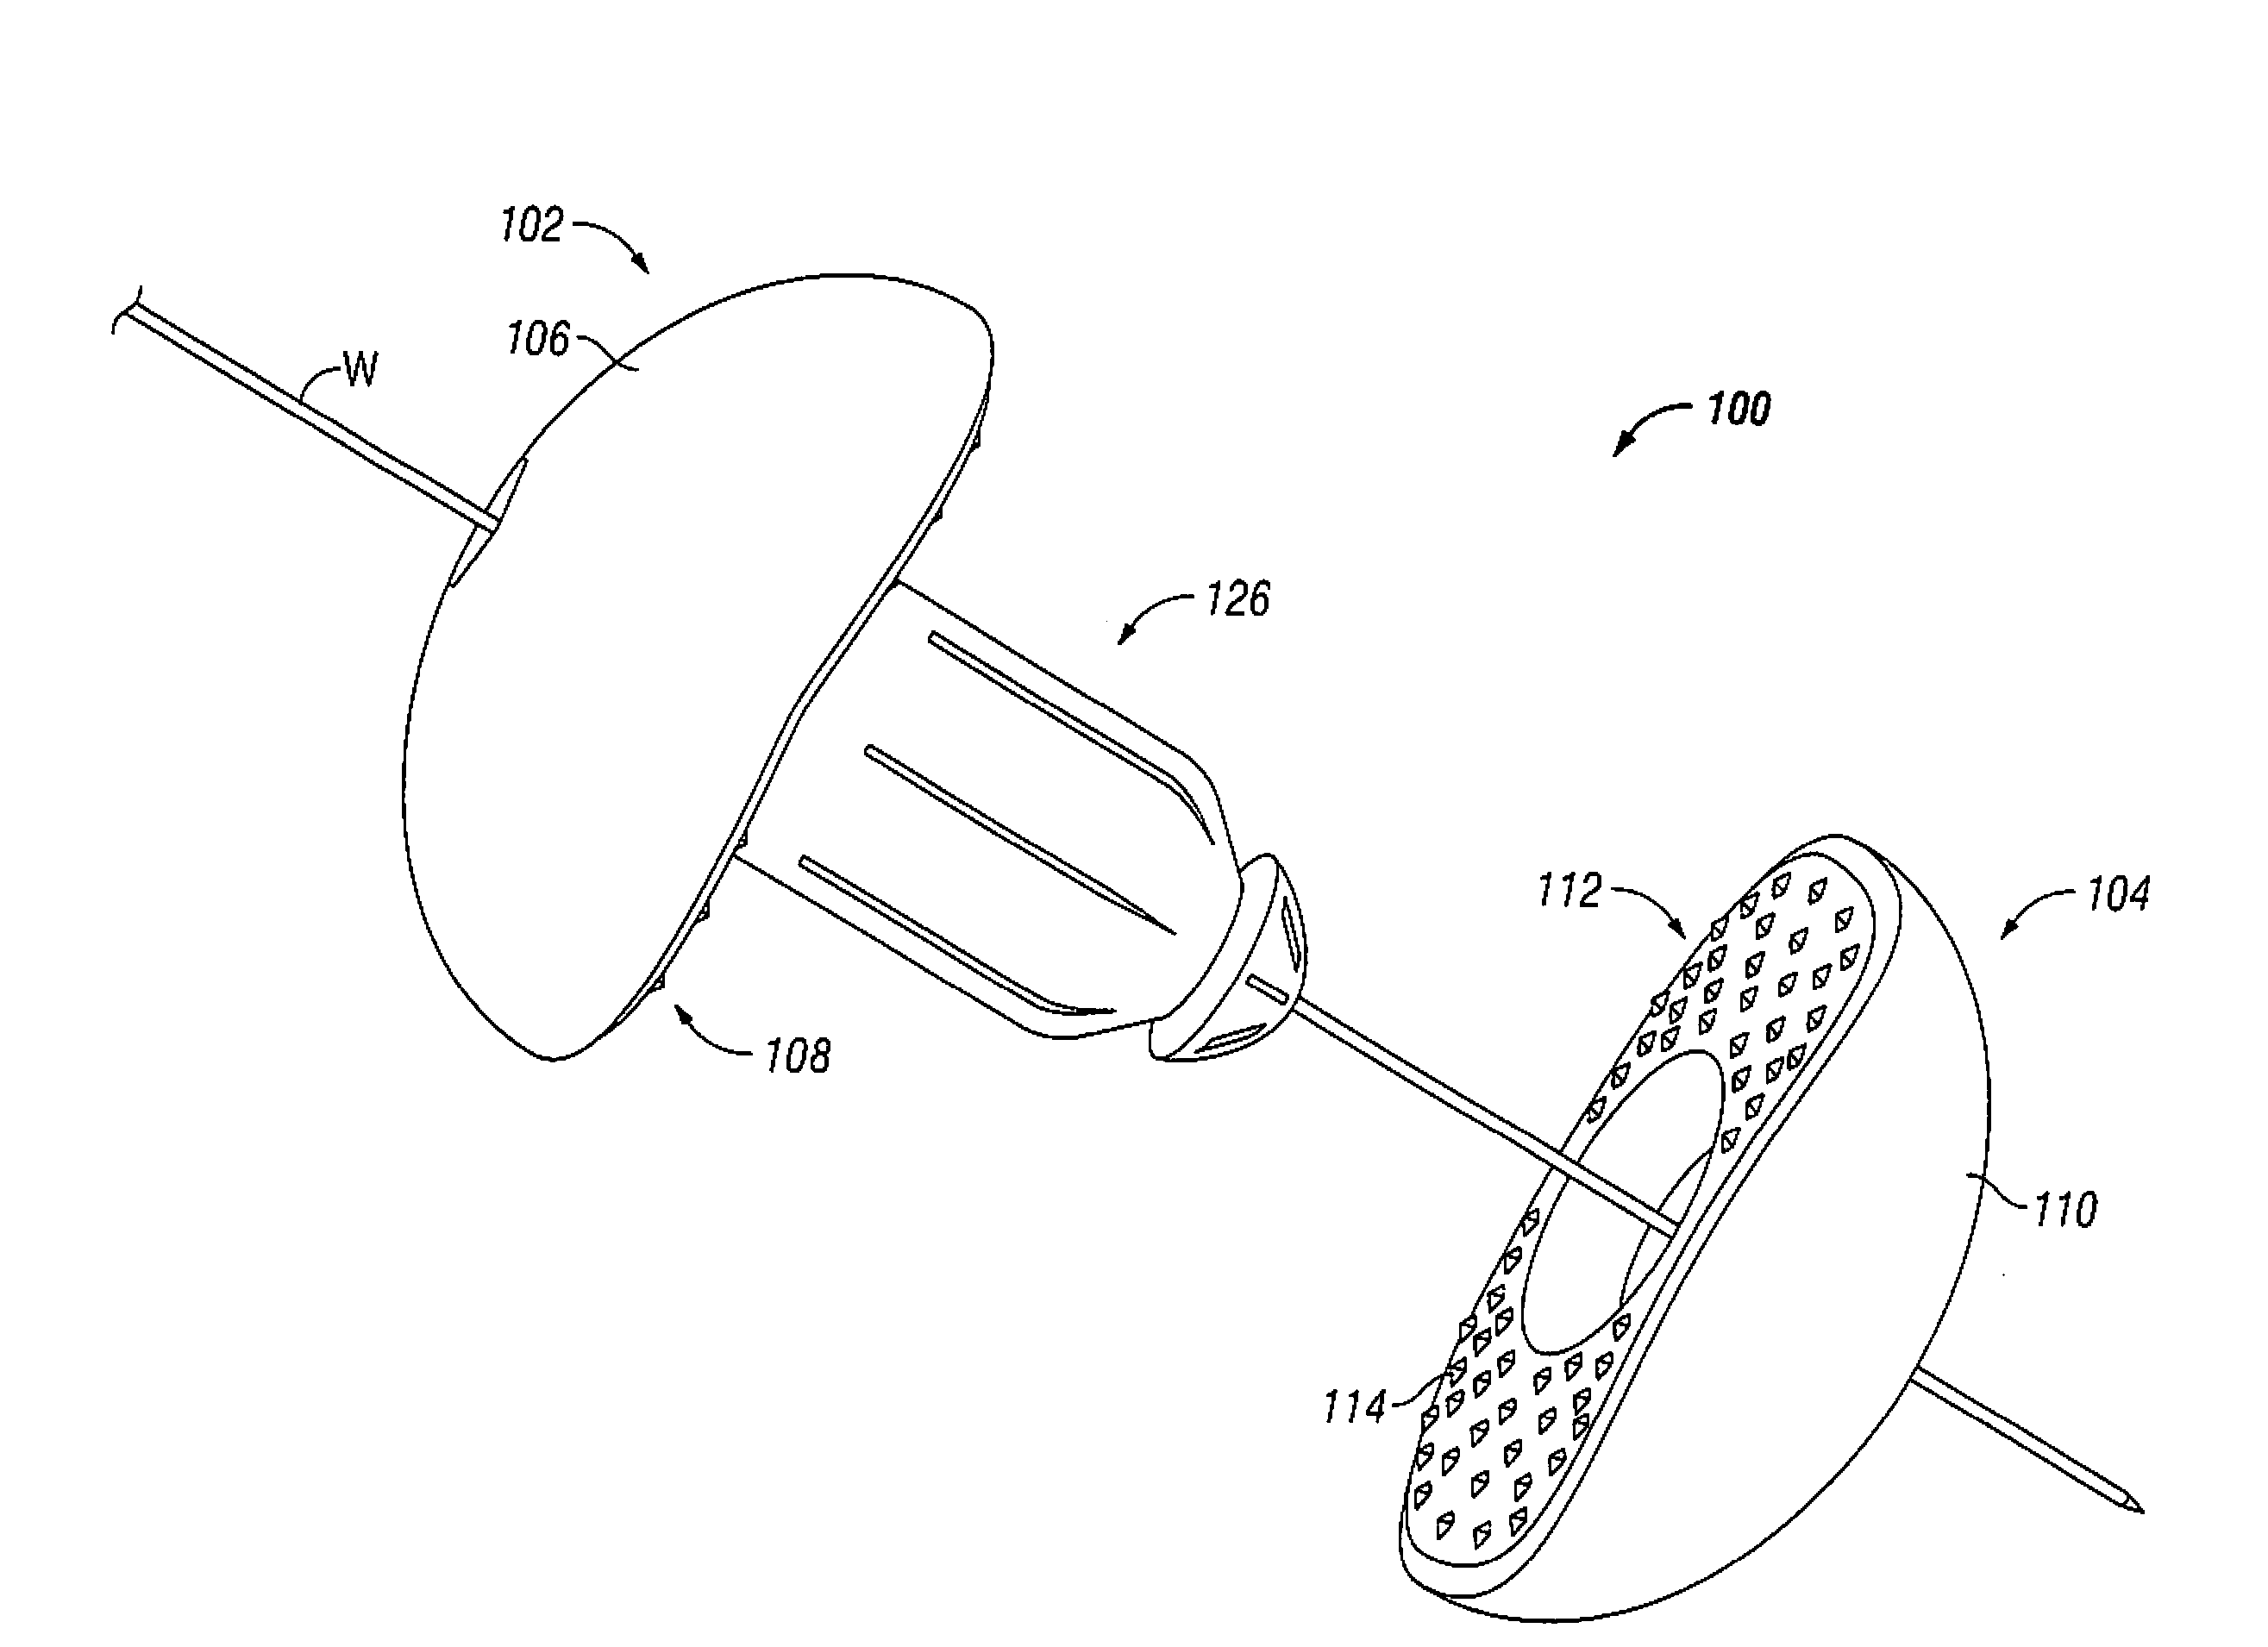 Percutaneous interspinous process device and method